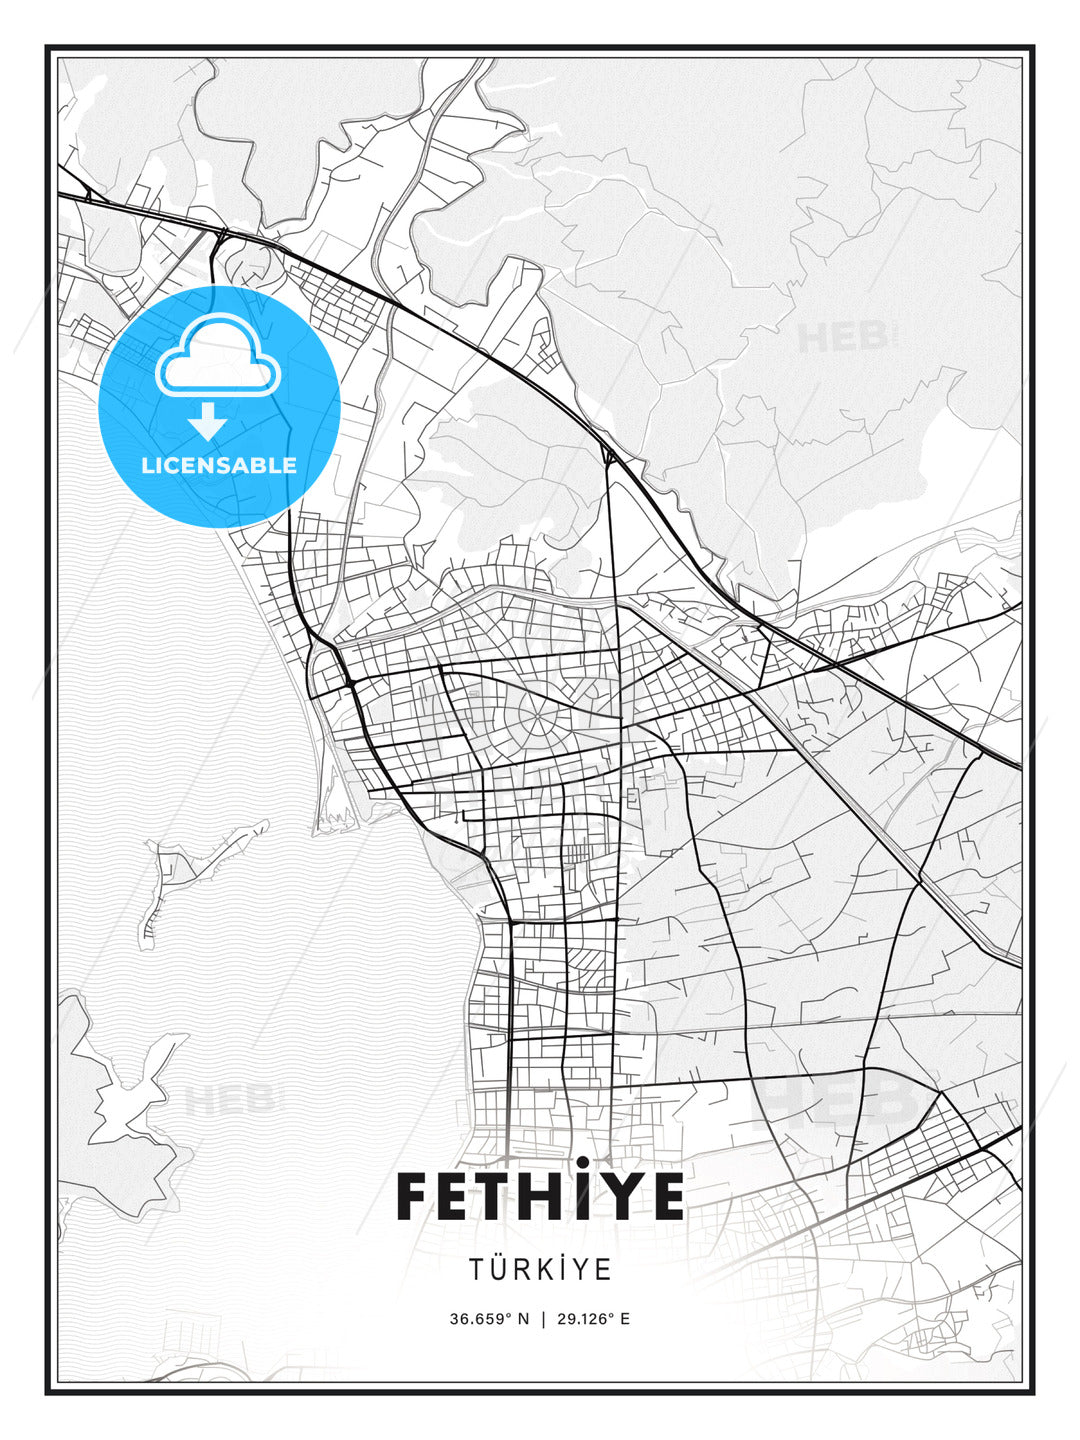 FETHİYE / Fethiye, Turkey, Modern Print Template in Various Formats - HEBSTREITS Sketches